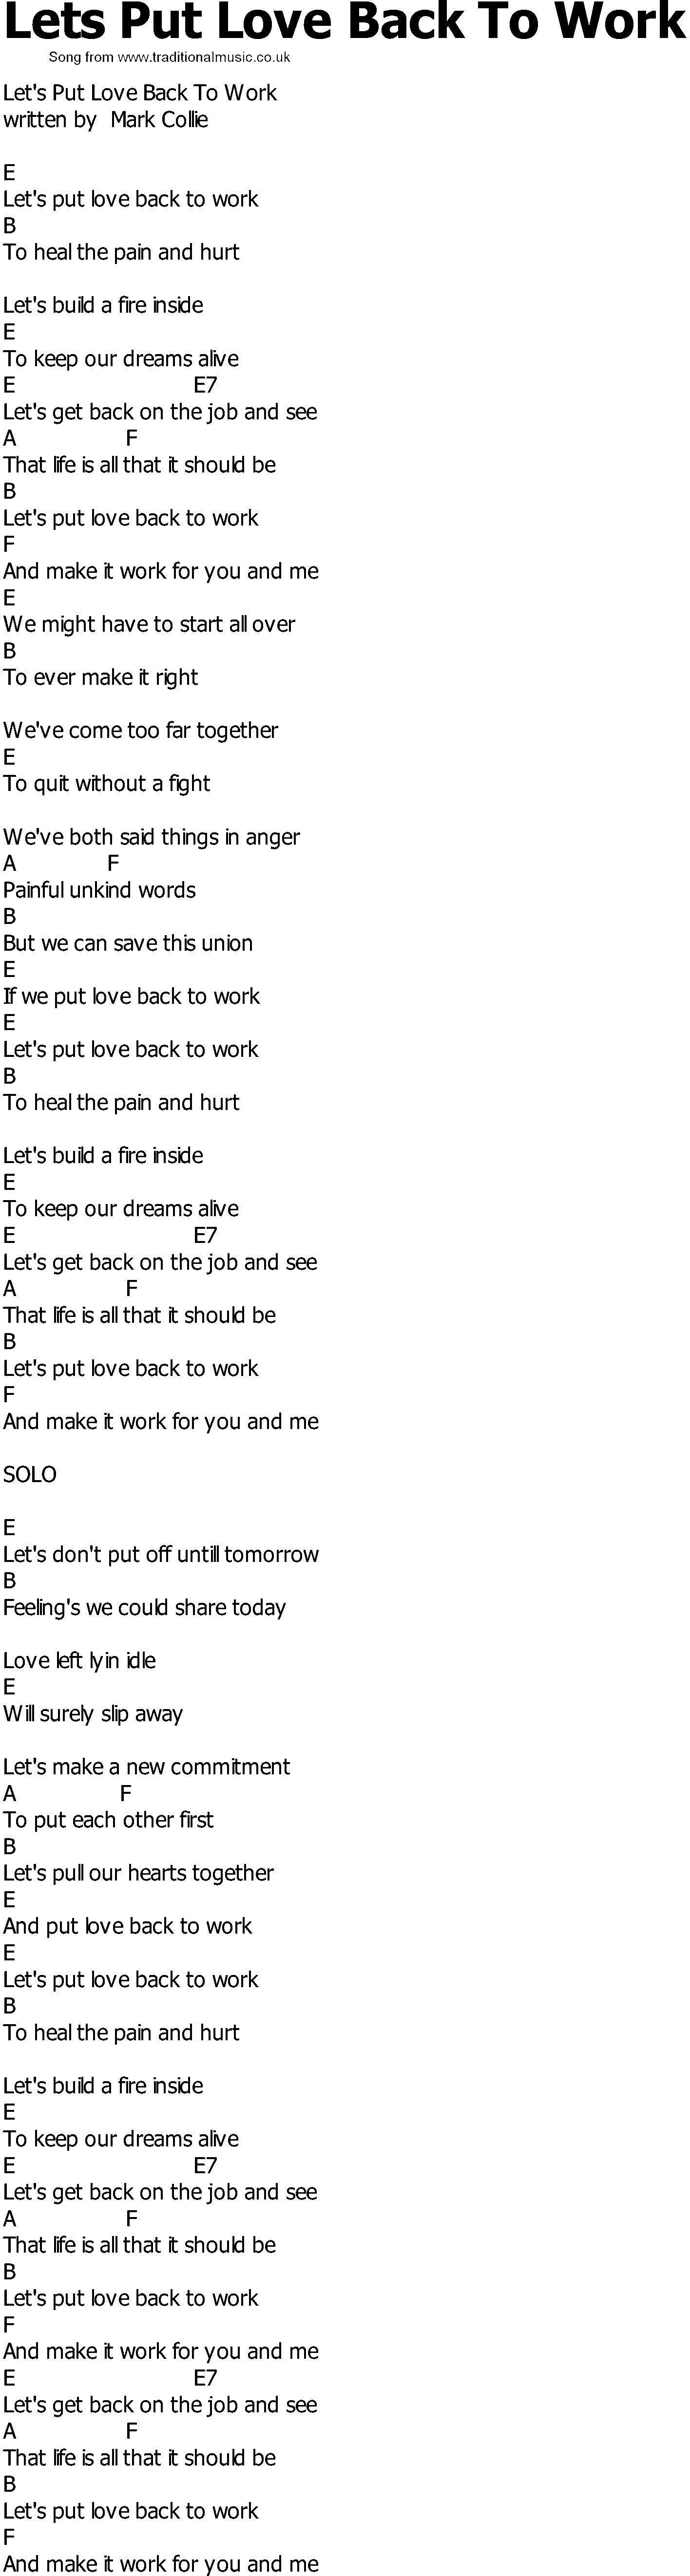 Old Country song lyrics with chords - Lets Put Love Back To Work